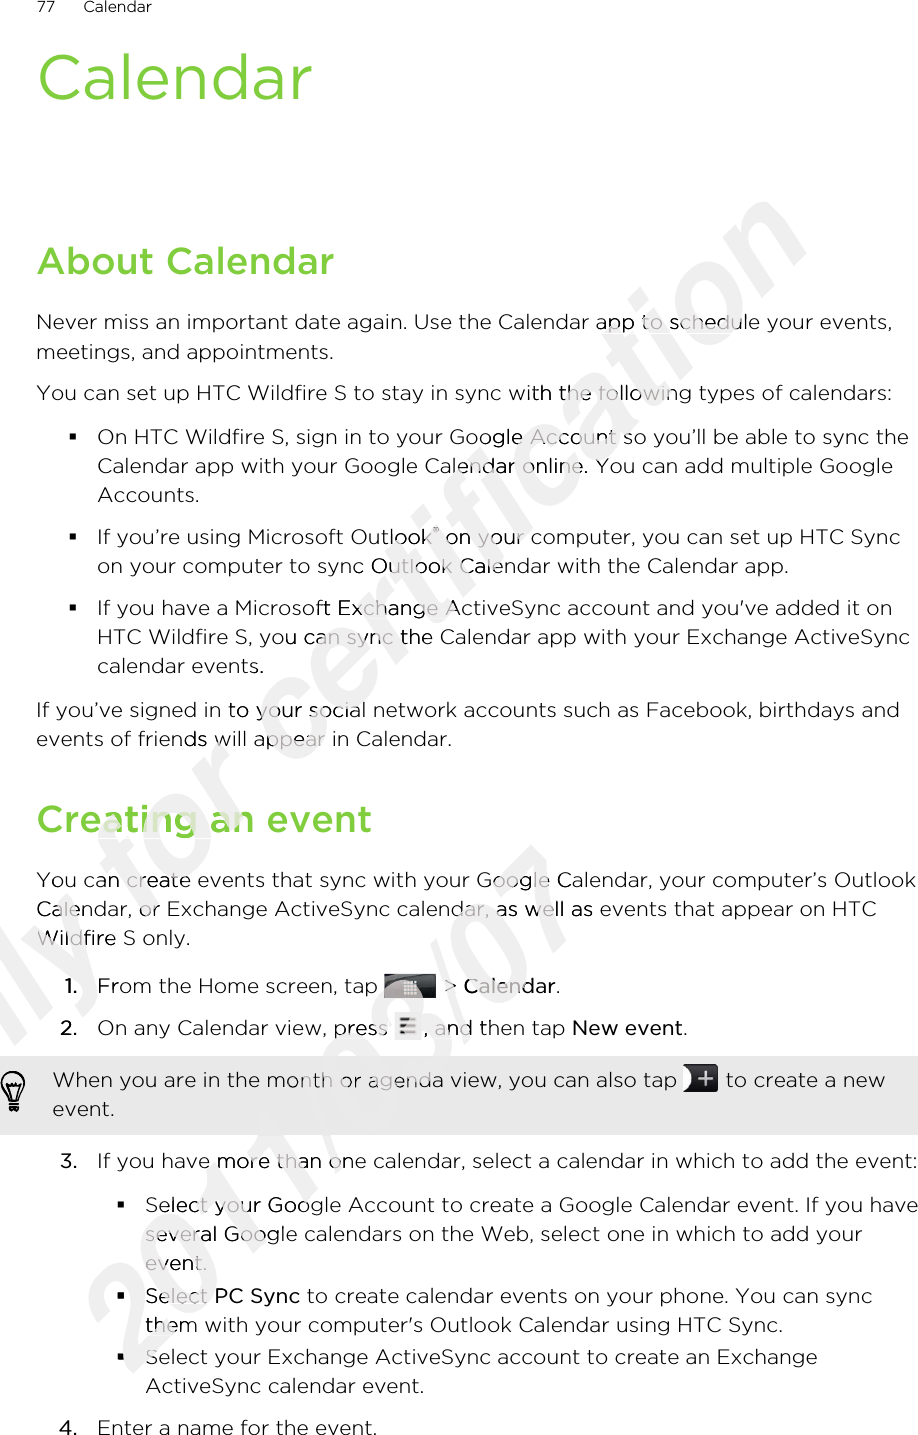 CalendarAbout CalendarNever miss an important date again. Use the Calendar app to schedule your events,meetings, and appointments.You can set up HTC Wildfire S to stay in sync with the following types of calendars:§On HTC Wildfire S, sign in to your Google Account so you’ll be able to sync theCalendar app with your Google Calendar online. You can add multiple GoogleAccounts.§If you’re using Microsoft Outlook® on your computer, you can set up HTC Syncon your computer to sync Outlook Calendar with the Calendar app.§If you have a Microsoft Exchange ActiveSync account and you&apos;ve added it onHTC Wildfire S, you can sync the Calendar app with your Exchange ActiveSynccalendar events.If you’ve signed in to your social network accounts such as Facebook, birthdays andevents of friends will appear in Calendar.Creating an eventYou can create events that sync with your Google Calendar, your computer’s OutlookCalendar, or Exchange ActiveSync calendar, as well as events that appear on HTCWildfire S only.1. From the Home screen, tap   &gt; Calendar.2. On any Calendar view, press  , and then tap New event. When you are in the month or agenda view, you can also tap   to create a newevent.3. If you have more than one calendar, select a calendar in which to add the event:§Select your Google Account to create a Google Calendar event. If you haveseveral Google calendars on the Web, select one in which to add yourevent.§Select PC Sync to create calendar events on your phone. You can syncthem with your computer&apos;s Outlook Calendar using HTC Sync.§Select your Exchange ActiveSync account to create an ExchangeActiveSync calendar event.4. Enter a name for the event.77 CalendarOnly You can create events that sync with your Google Calendar, your computer’s OutlookOnly You can create events that sync with your Google Calendar, your computer’s OutlookCalendar, or Exchange ActiveSync calendar, as well as events that appear on HTCOnly Calendar, or Exchange ActiveSync calendar, as well as events that appear on HTCWildfire S only.Only Wildfire S only.1.Only 1.From the Home screen, tap Only From the Home screen, tap 2.Only 2.Only Only Only Only for events of friends will appear in Calendar.for events of friends will appear in Calendar.Creating an eventfor Creating an eventYou can create events that sync with your Google Calendar, your computer’s Outlookfor You can create events that sync with your Google Calendar, your computer’s OutlookCalendar, or Exchange ActiveSync calendar, as well as events that appear on HTCfor Calendar, or Exchange ActiveSync calendar, as well as events that appear on HTCcertification Never miss an important date again. Use the Calendar app to schedule your events,certification Never miss an important date again. Use the Calendar app to schedule your events,You can set up HTC Wildfire S to stay in sync with the following types of calendars:certification You can set up HTC Wildfire S to stay in sync with the following types of calendars:On HTC Wildfire S, sign in to your Google Account so you’ll be able to sync thecertification On HTC Wildfire S, sign in to your Google Account so you’ll be able to sync theCalendar app with your Google Calendar online. You can add multiple Googlecertification Calendar app with your Google Calendar online. You can add multiple GoogleIf you’re using Microsoft Outlookcertification If you’re using Microsoft Outlook®certification ® on your computer, you can set up HTC Synccertification  on your computer, you can set up HTC Syncon your computer to sync Outlook Calendar with the Calendar app.certification on your computer to sync Outlook Calendar with the Calendar app.If you have a Microsoft Exchange ActiveSync account and you&apos;ve added it oncertification If you have a Microsoft Exchange ActiveSync account and you&apos;ve added it onHTC Wildfire S, you can sync the Calendar app with your Exchange ActiveSynccertification HTC Wildfire S, you can sync the Calendar app with your Exchange ActiveSynccalendar events.certification calendar events.If you’ve signed in to your social network accounts such as Facebook, birthdays andcertification If you’ve signed in to your social network accounts such as Facebook, birthdays andevents of friends will appear in Calendar.certification events of friends will appear in Calendar.2011/03/07You can create events that sync with your Google Calendar, your computer’s Outlook2011/03/07You can create events that sync with your Google Calendar, your computer’s OutlookCalendar, or Exchange ActiveSync calendar, as well as events that appear on HTC2011/03/07Calendar, or Exchange ActiveSync calendar, as well as events that appear on HTCFrom the Home screen, tap 2011/03/07From the Home screen, tap 2011/03/07 &gt; 2011/03/07 &gt; Calendar2011/03/07CalendarOn any Calendar view, press 2011/03/07On any Calendar view, press 2011/03/07, and then tap 2011/03/07, and then tap 2011/03/072011/03/072011/03/072011/03/07When you are in the month or agenda view, you can also tap 2011/03/07When you are in the month or agenda view, you can also tap If you have more than one calendar, select a calendar in which to add the event:2011/03/07If you have more than one calendar, select a calendar in which to add the event:Select your Google Account to create a Google Calendar event. If you have2011/03/07Select your Google Account to create a Google Calendar event. If you haveseveral Google calendars on the Web, select one in which to add your2011/03/07several Google calendars on the Web, select one in which to add yourevent.2011/03/07event.§2011/03/07§Select 2011/03/07Select PC Sync2011/03/07PC Syncthem with your computer&apos;s Outlook Calendar using HTC Sync.2011/03/07them with your computer&apos;s Outlook Calendar using HTC Sync.§2011/03/07§Select your Exchange ActiveSync account to create an Exchange2011/03/07Select your Exchange ActiveSync account to create an Exchange